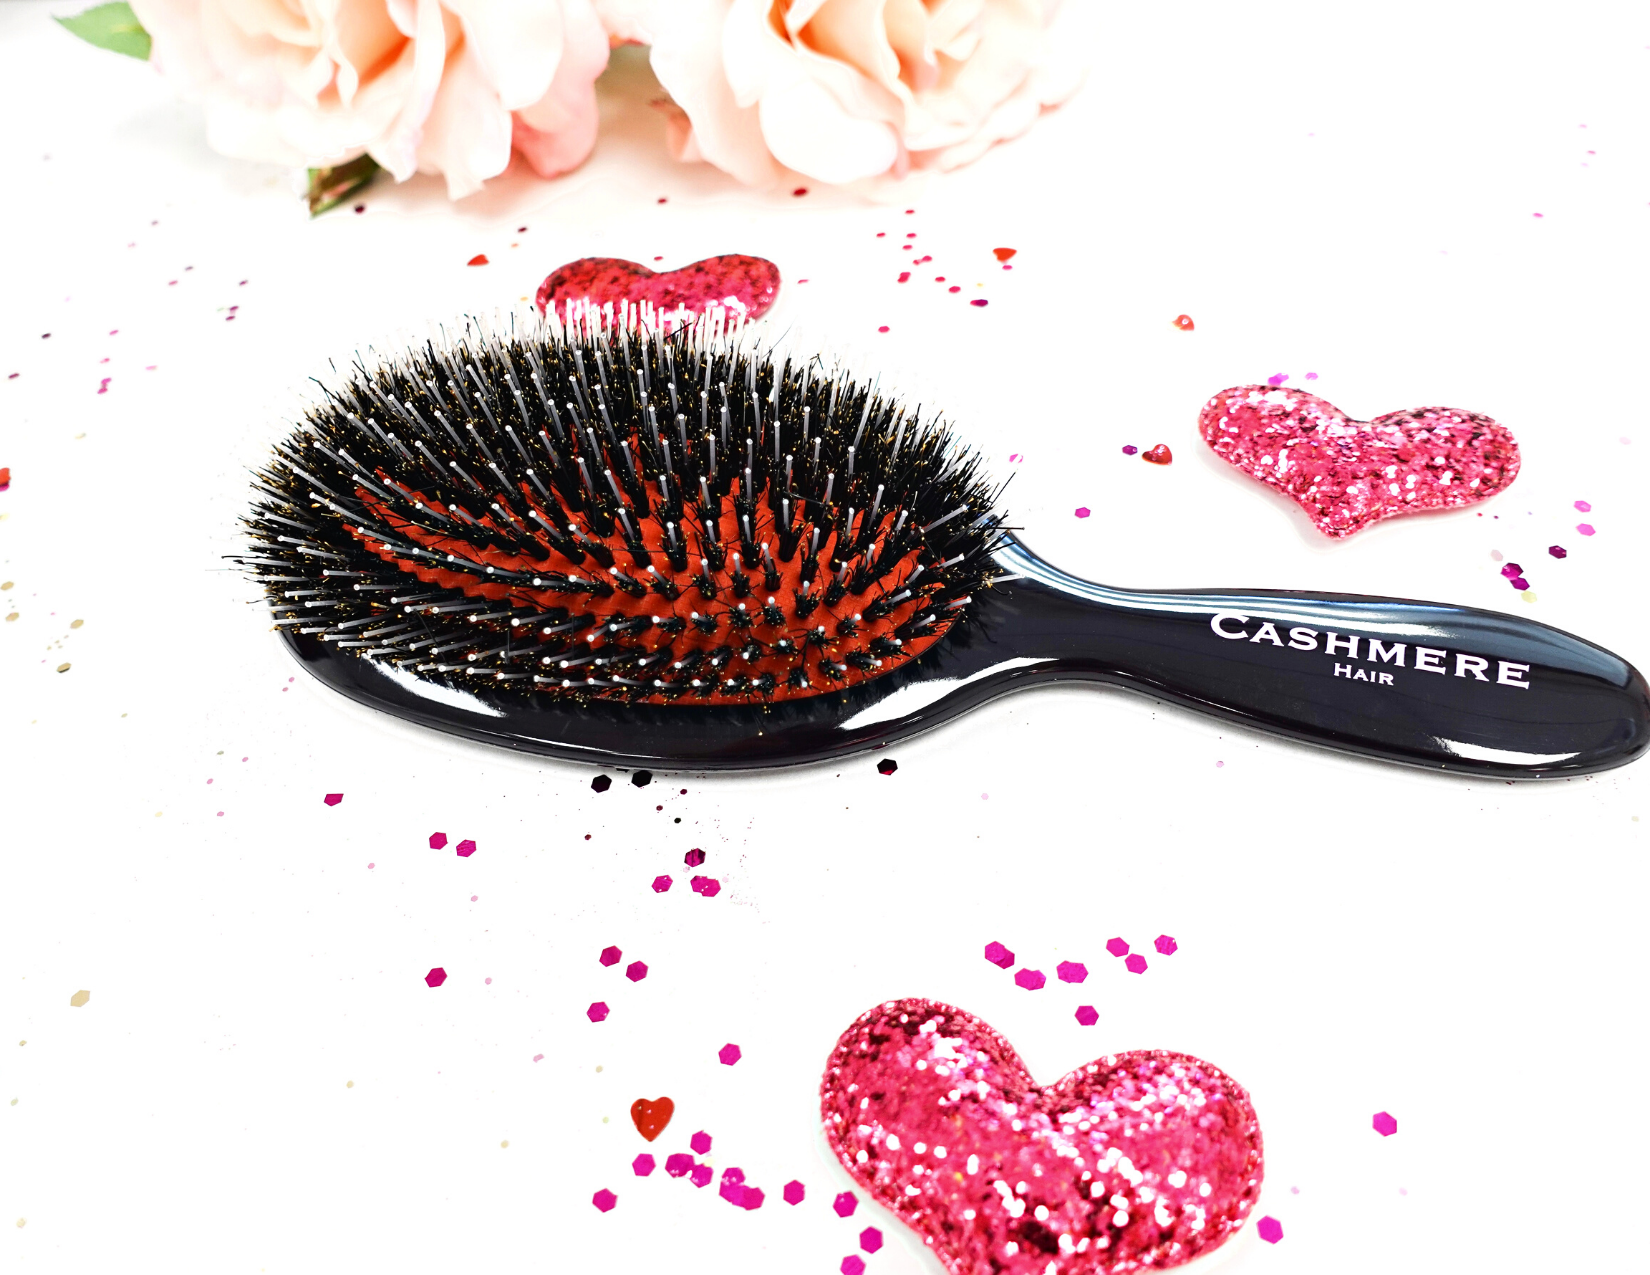 The Cashmere Hair Boar Extension Brush